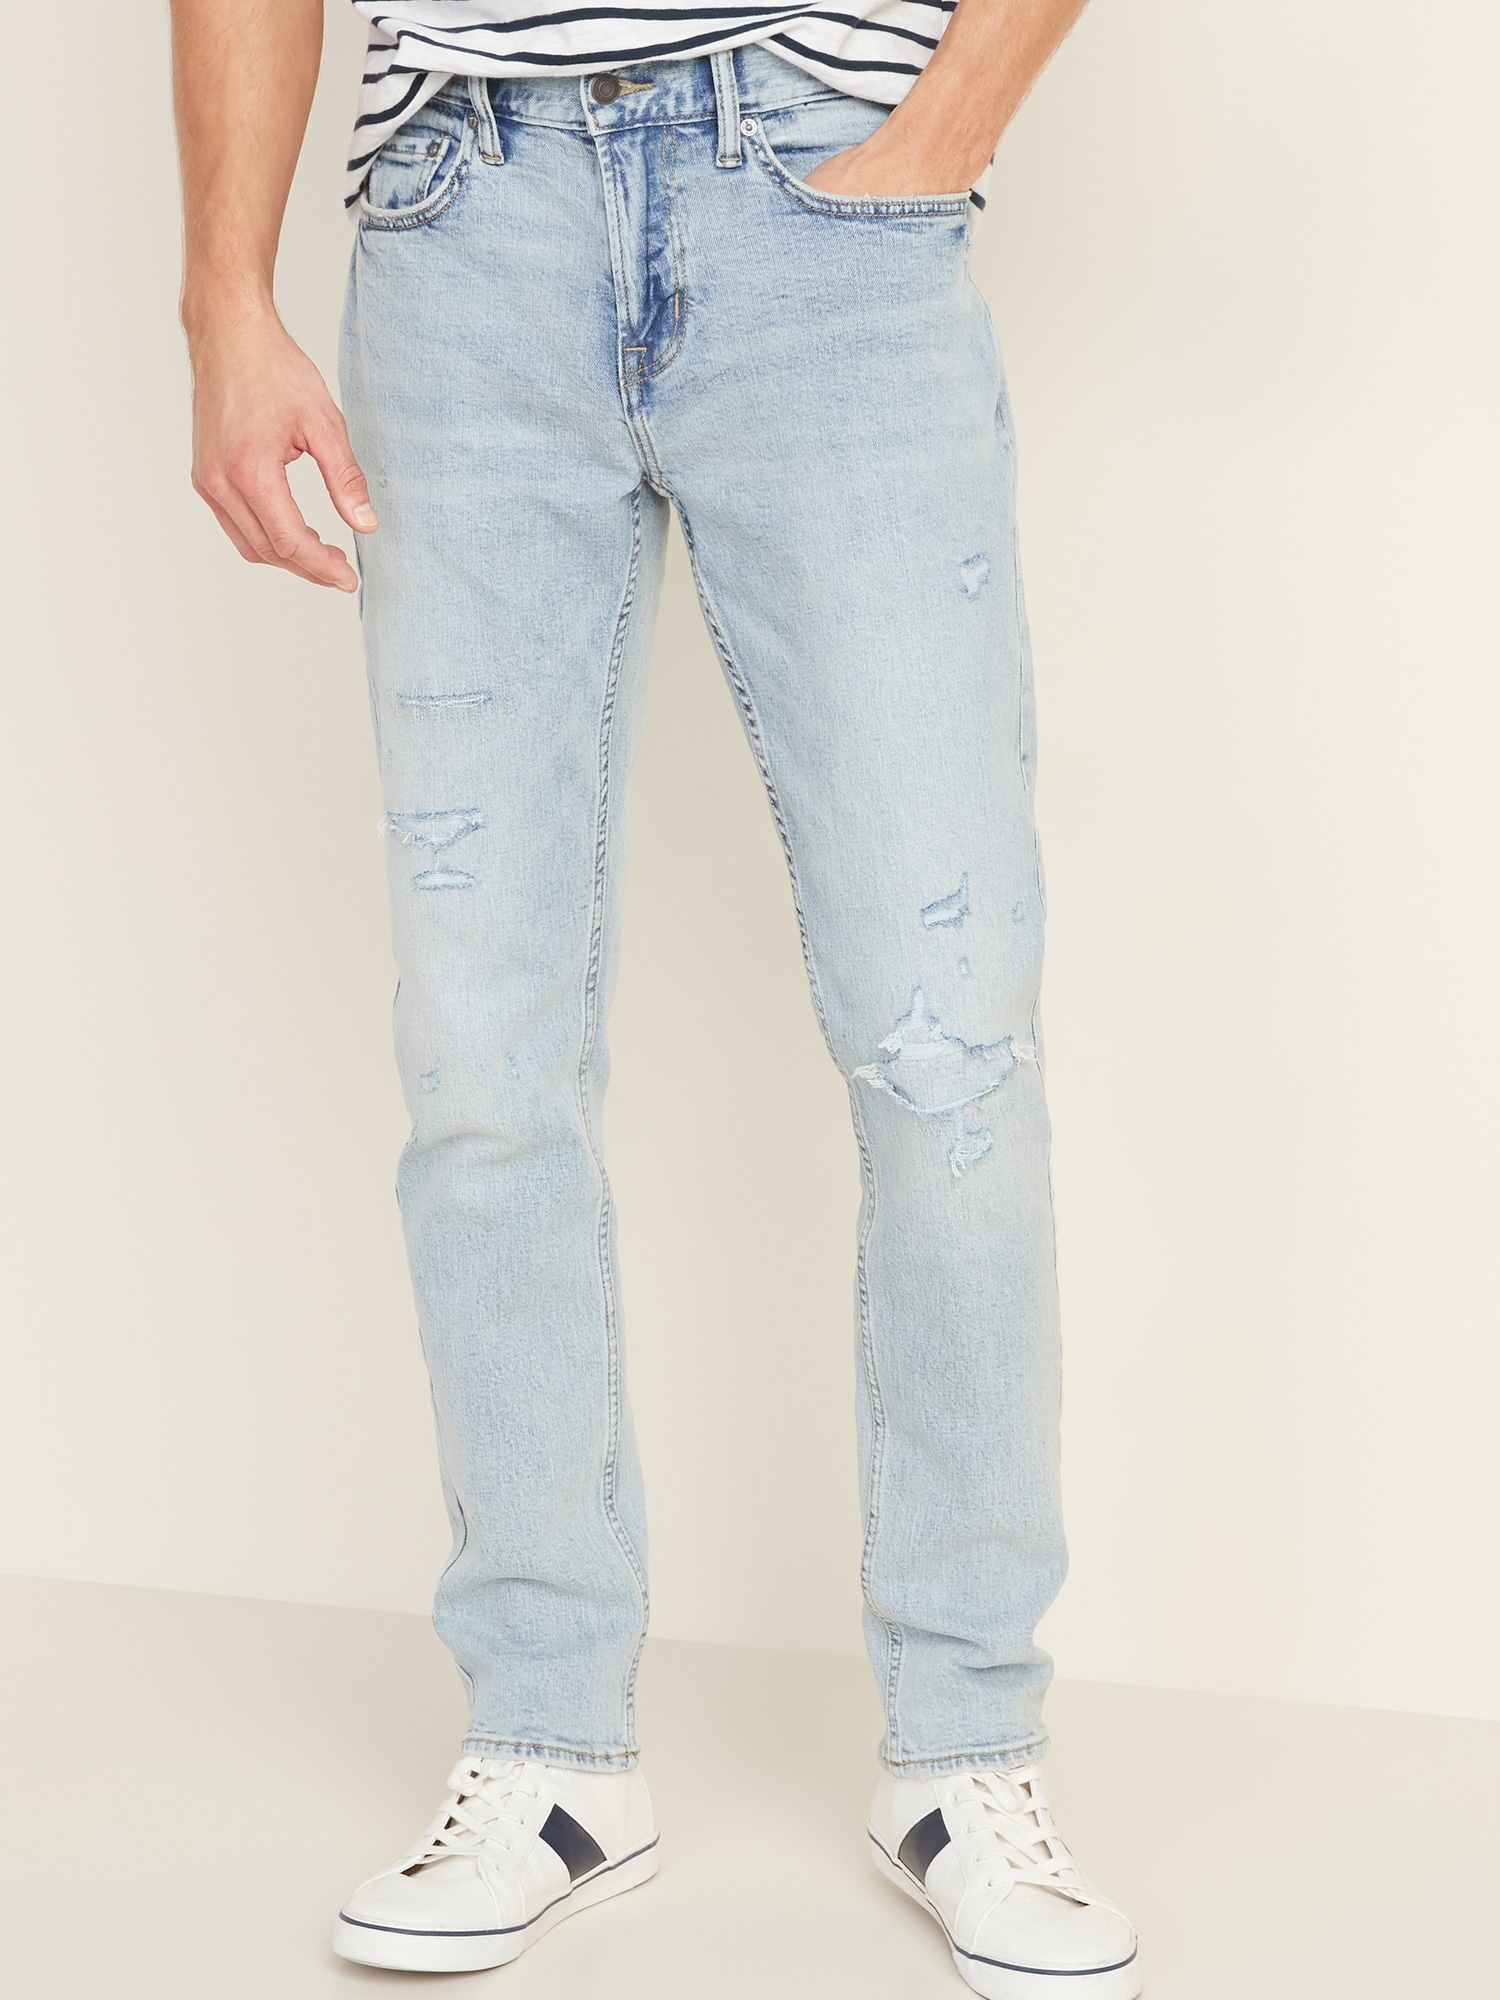 light wash jeans with holes